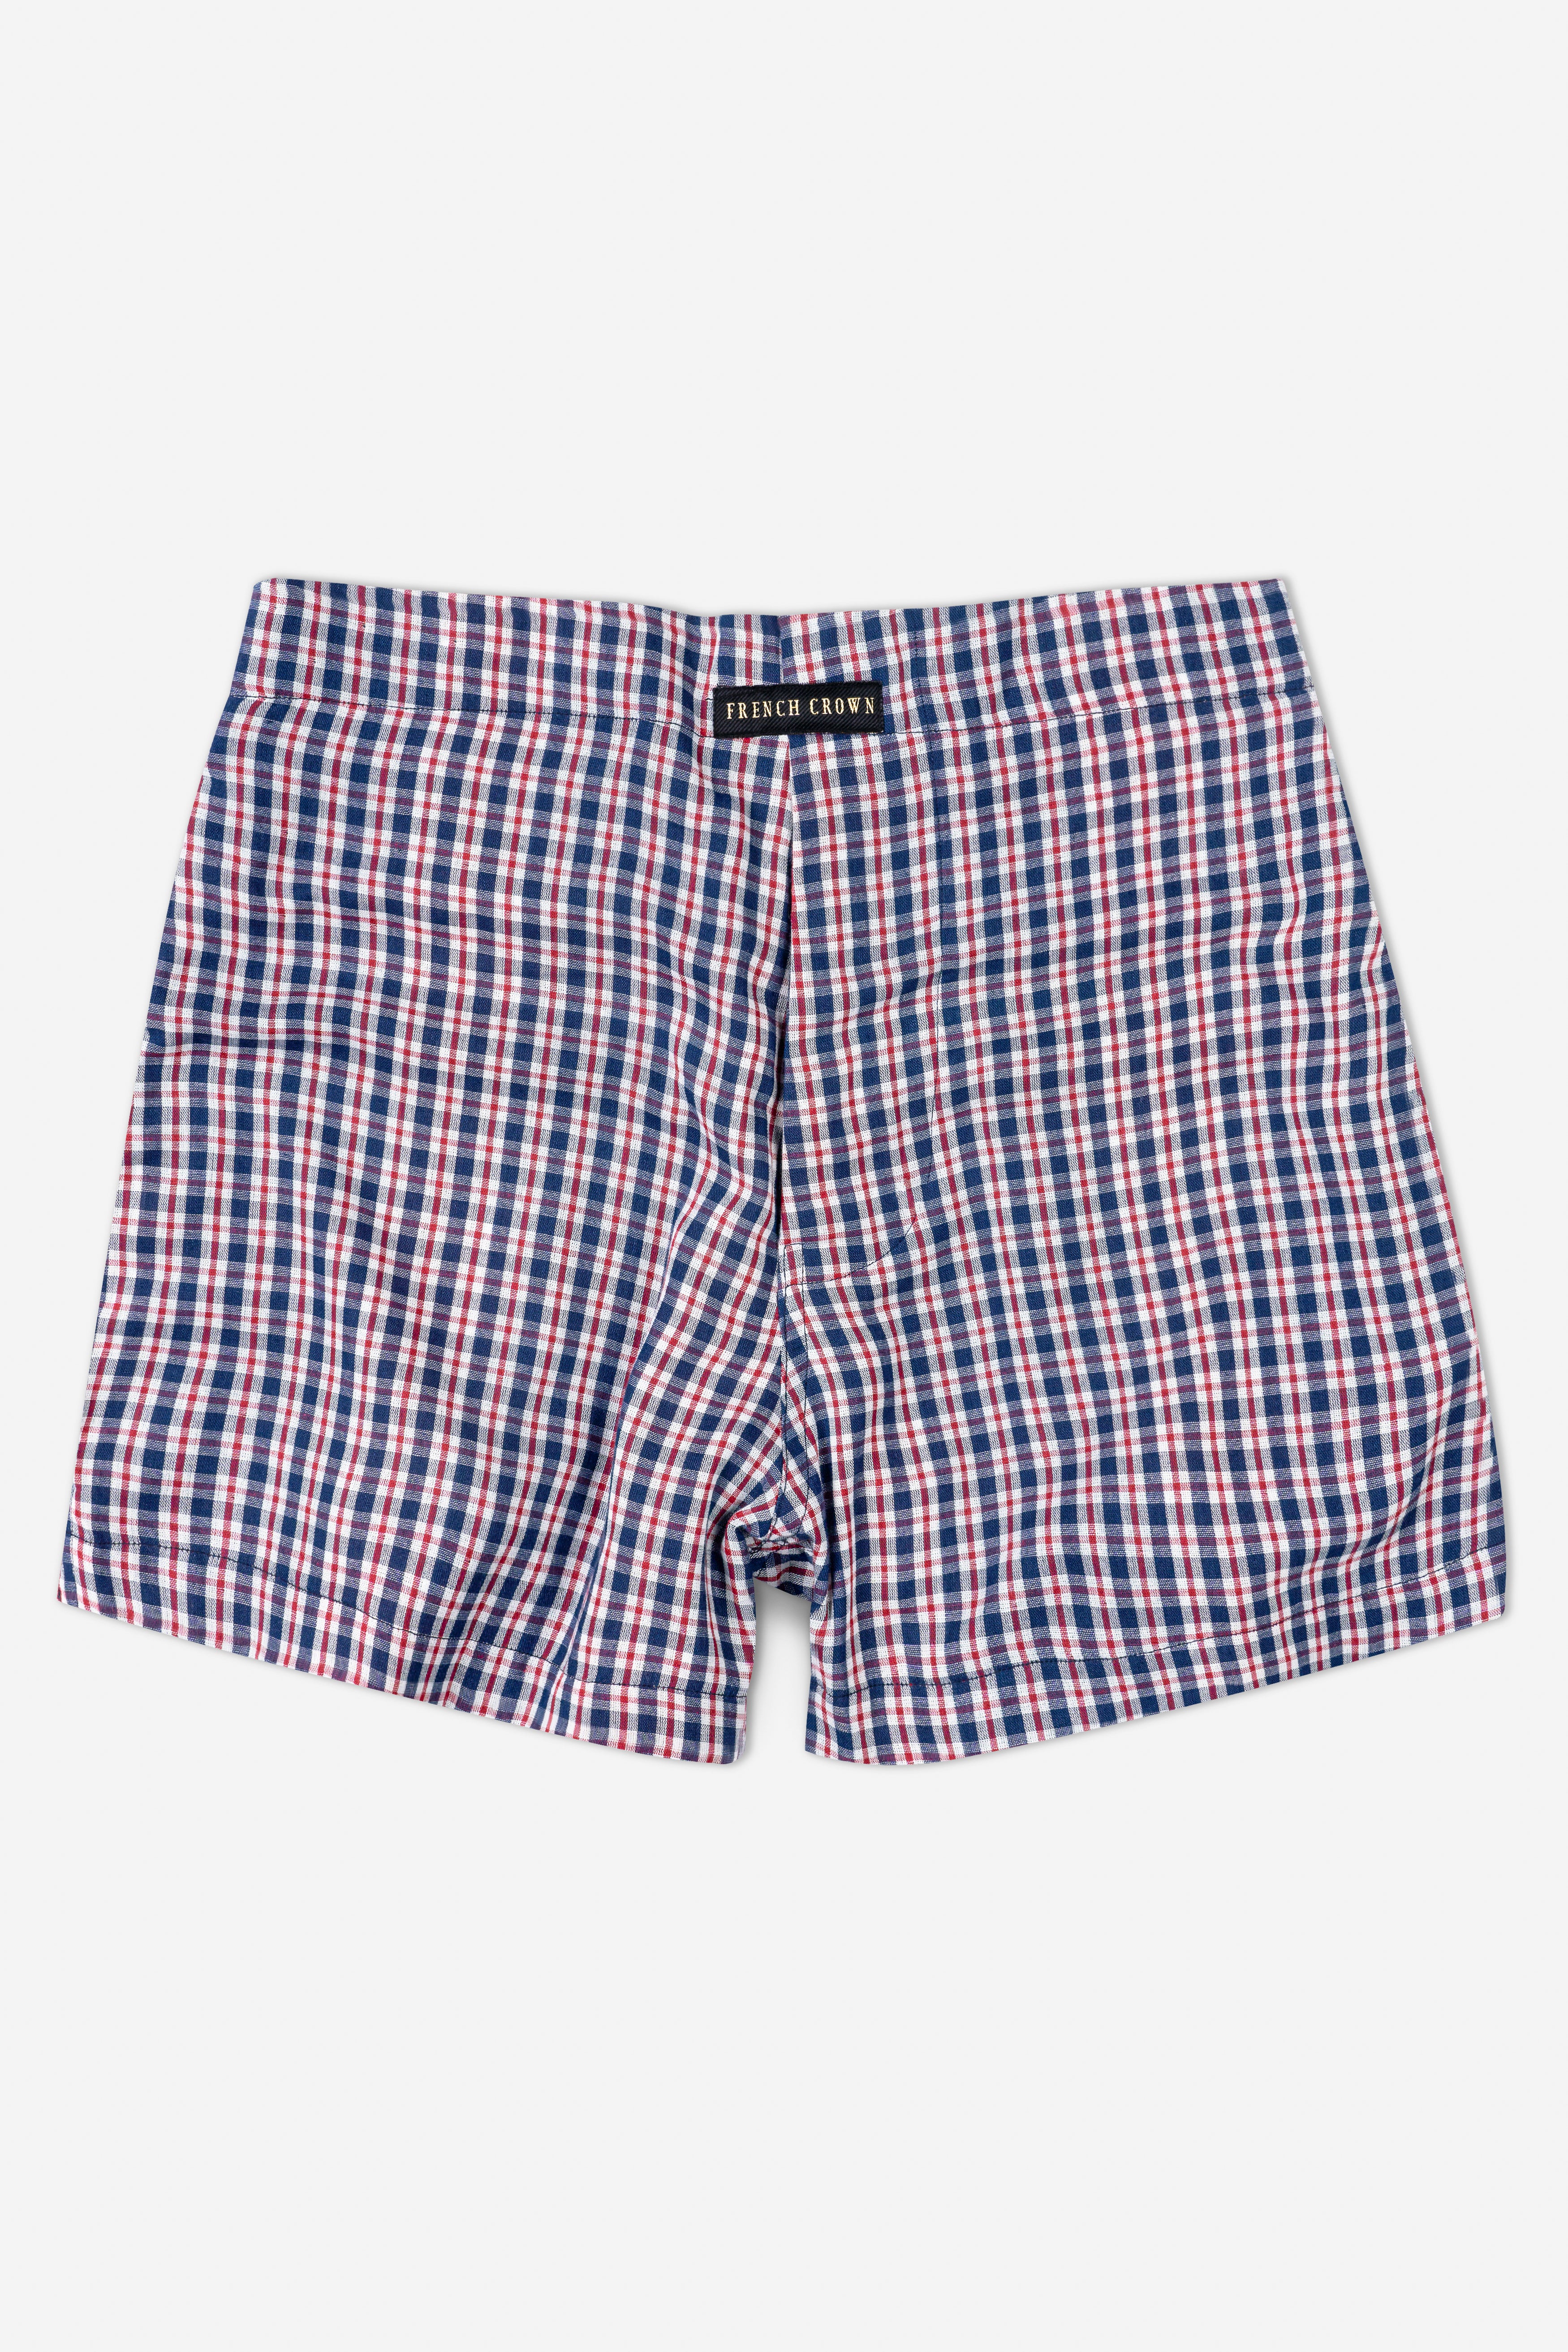 Nile Blue And Stiletto Red With White Checkered Royal Oxford Boxer BX524-28, BX524-30, BX524-32, BX524-34, BX524-36, BX524-38, BX524-40, BX524-42, BX524-44